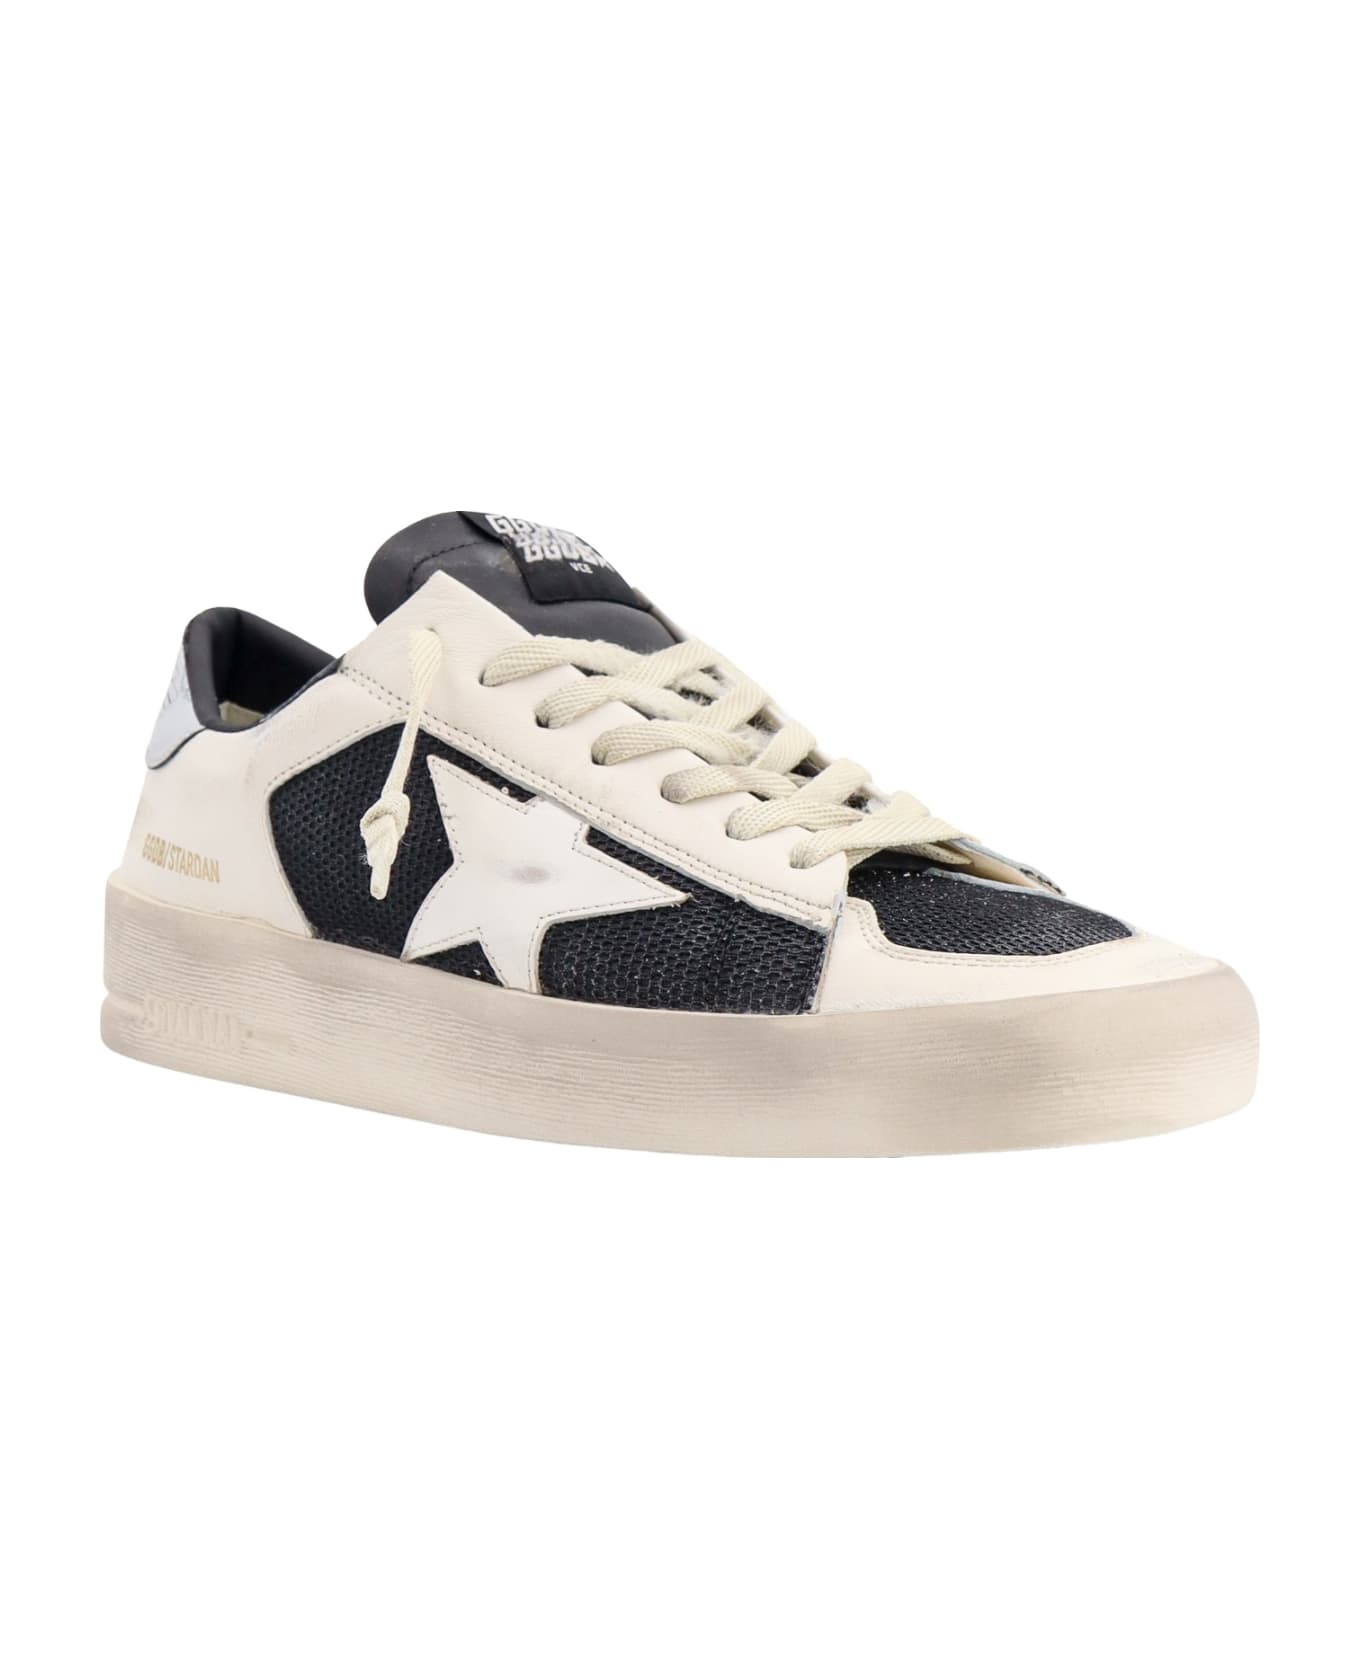 Golden Goose Leather And Mesh Stardan Sneakers - Black